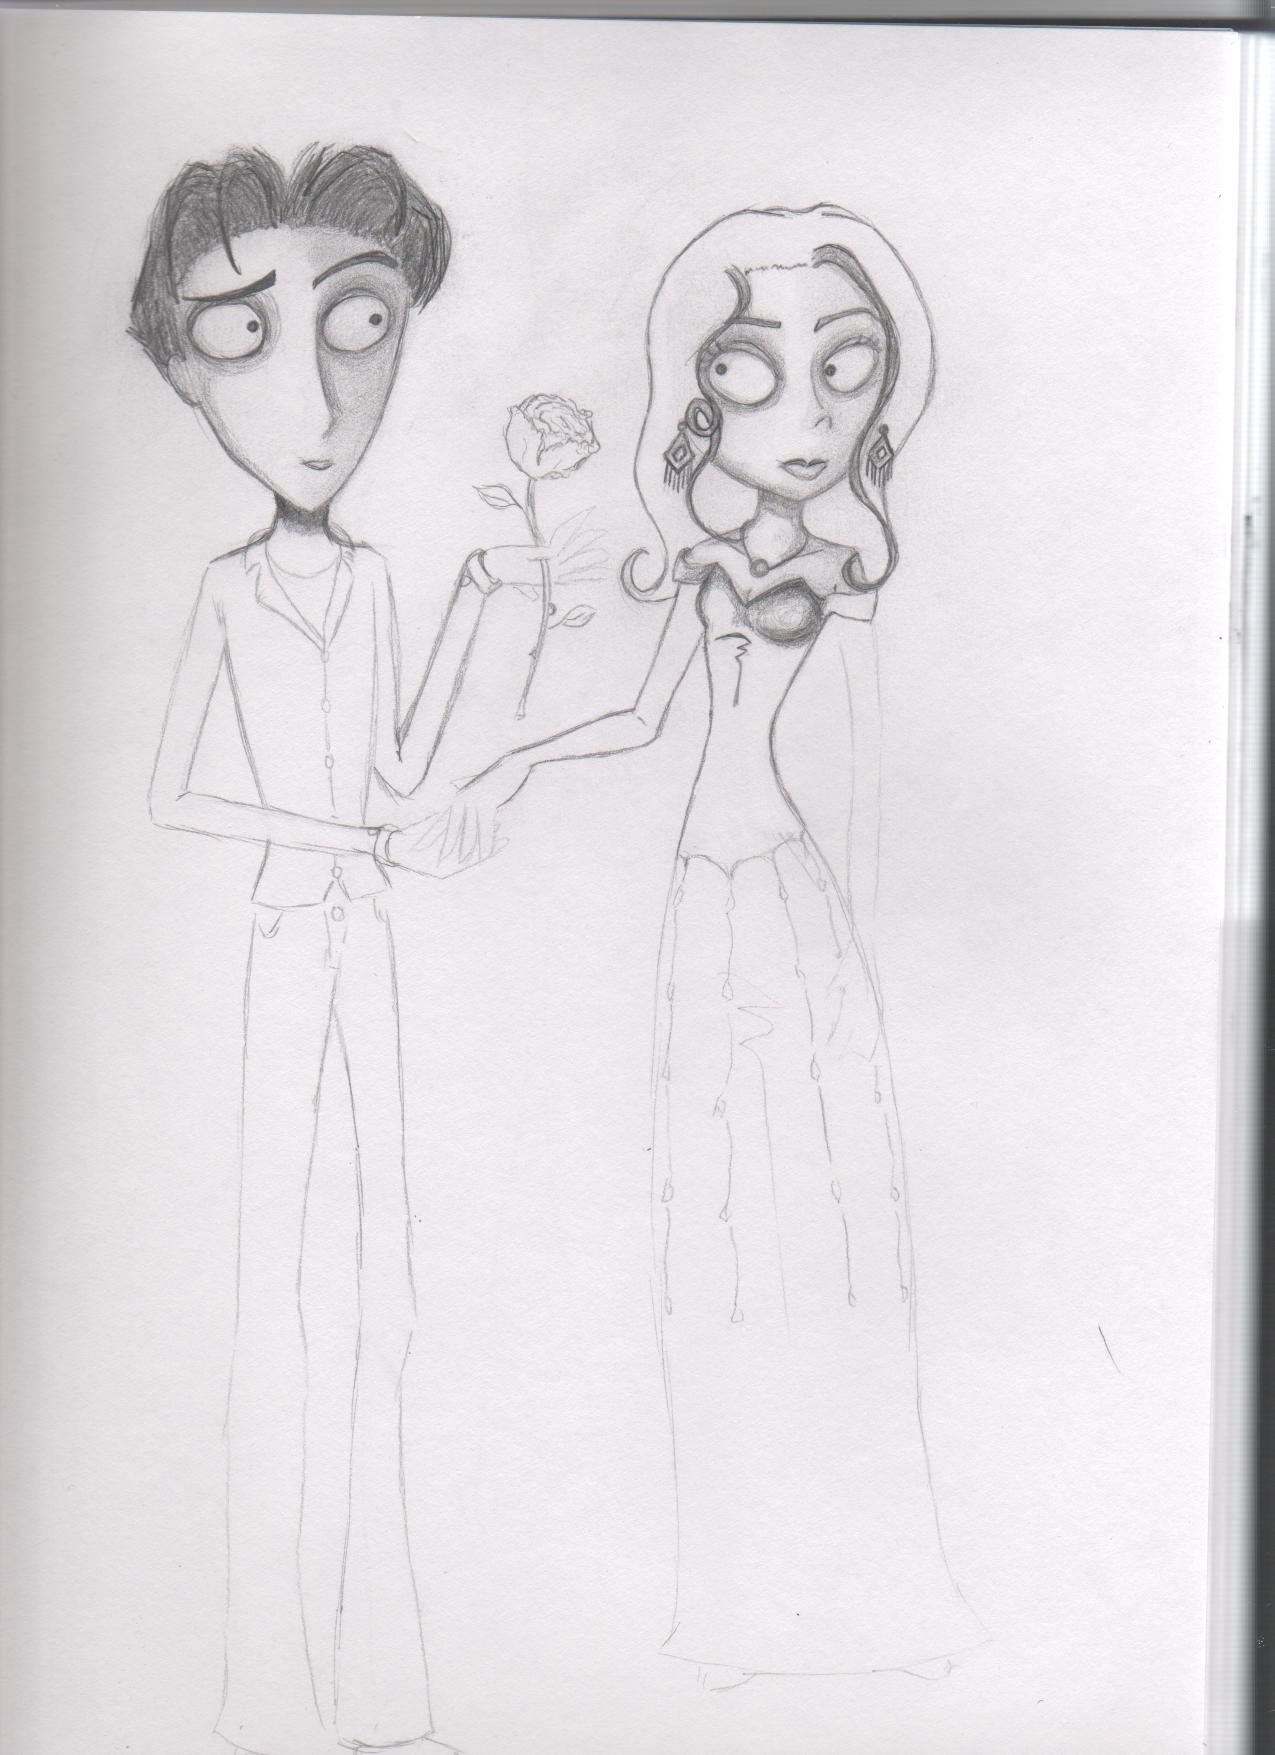 Corpse Bride themed pic by Shinkies